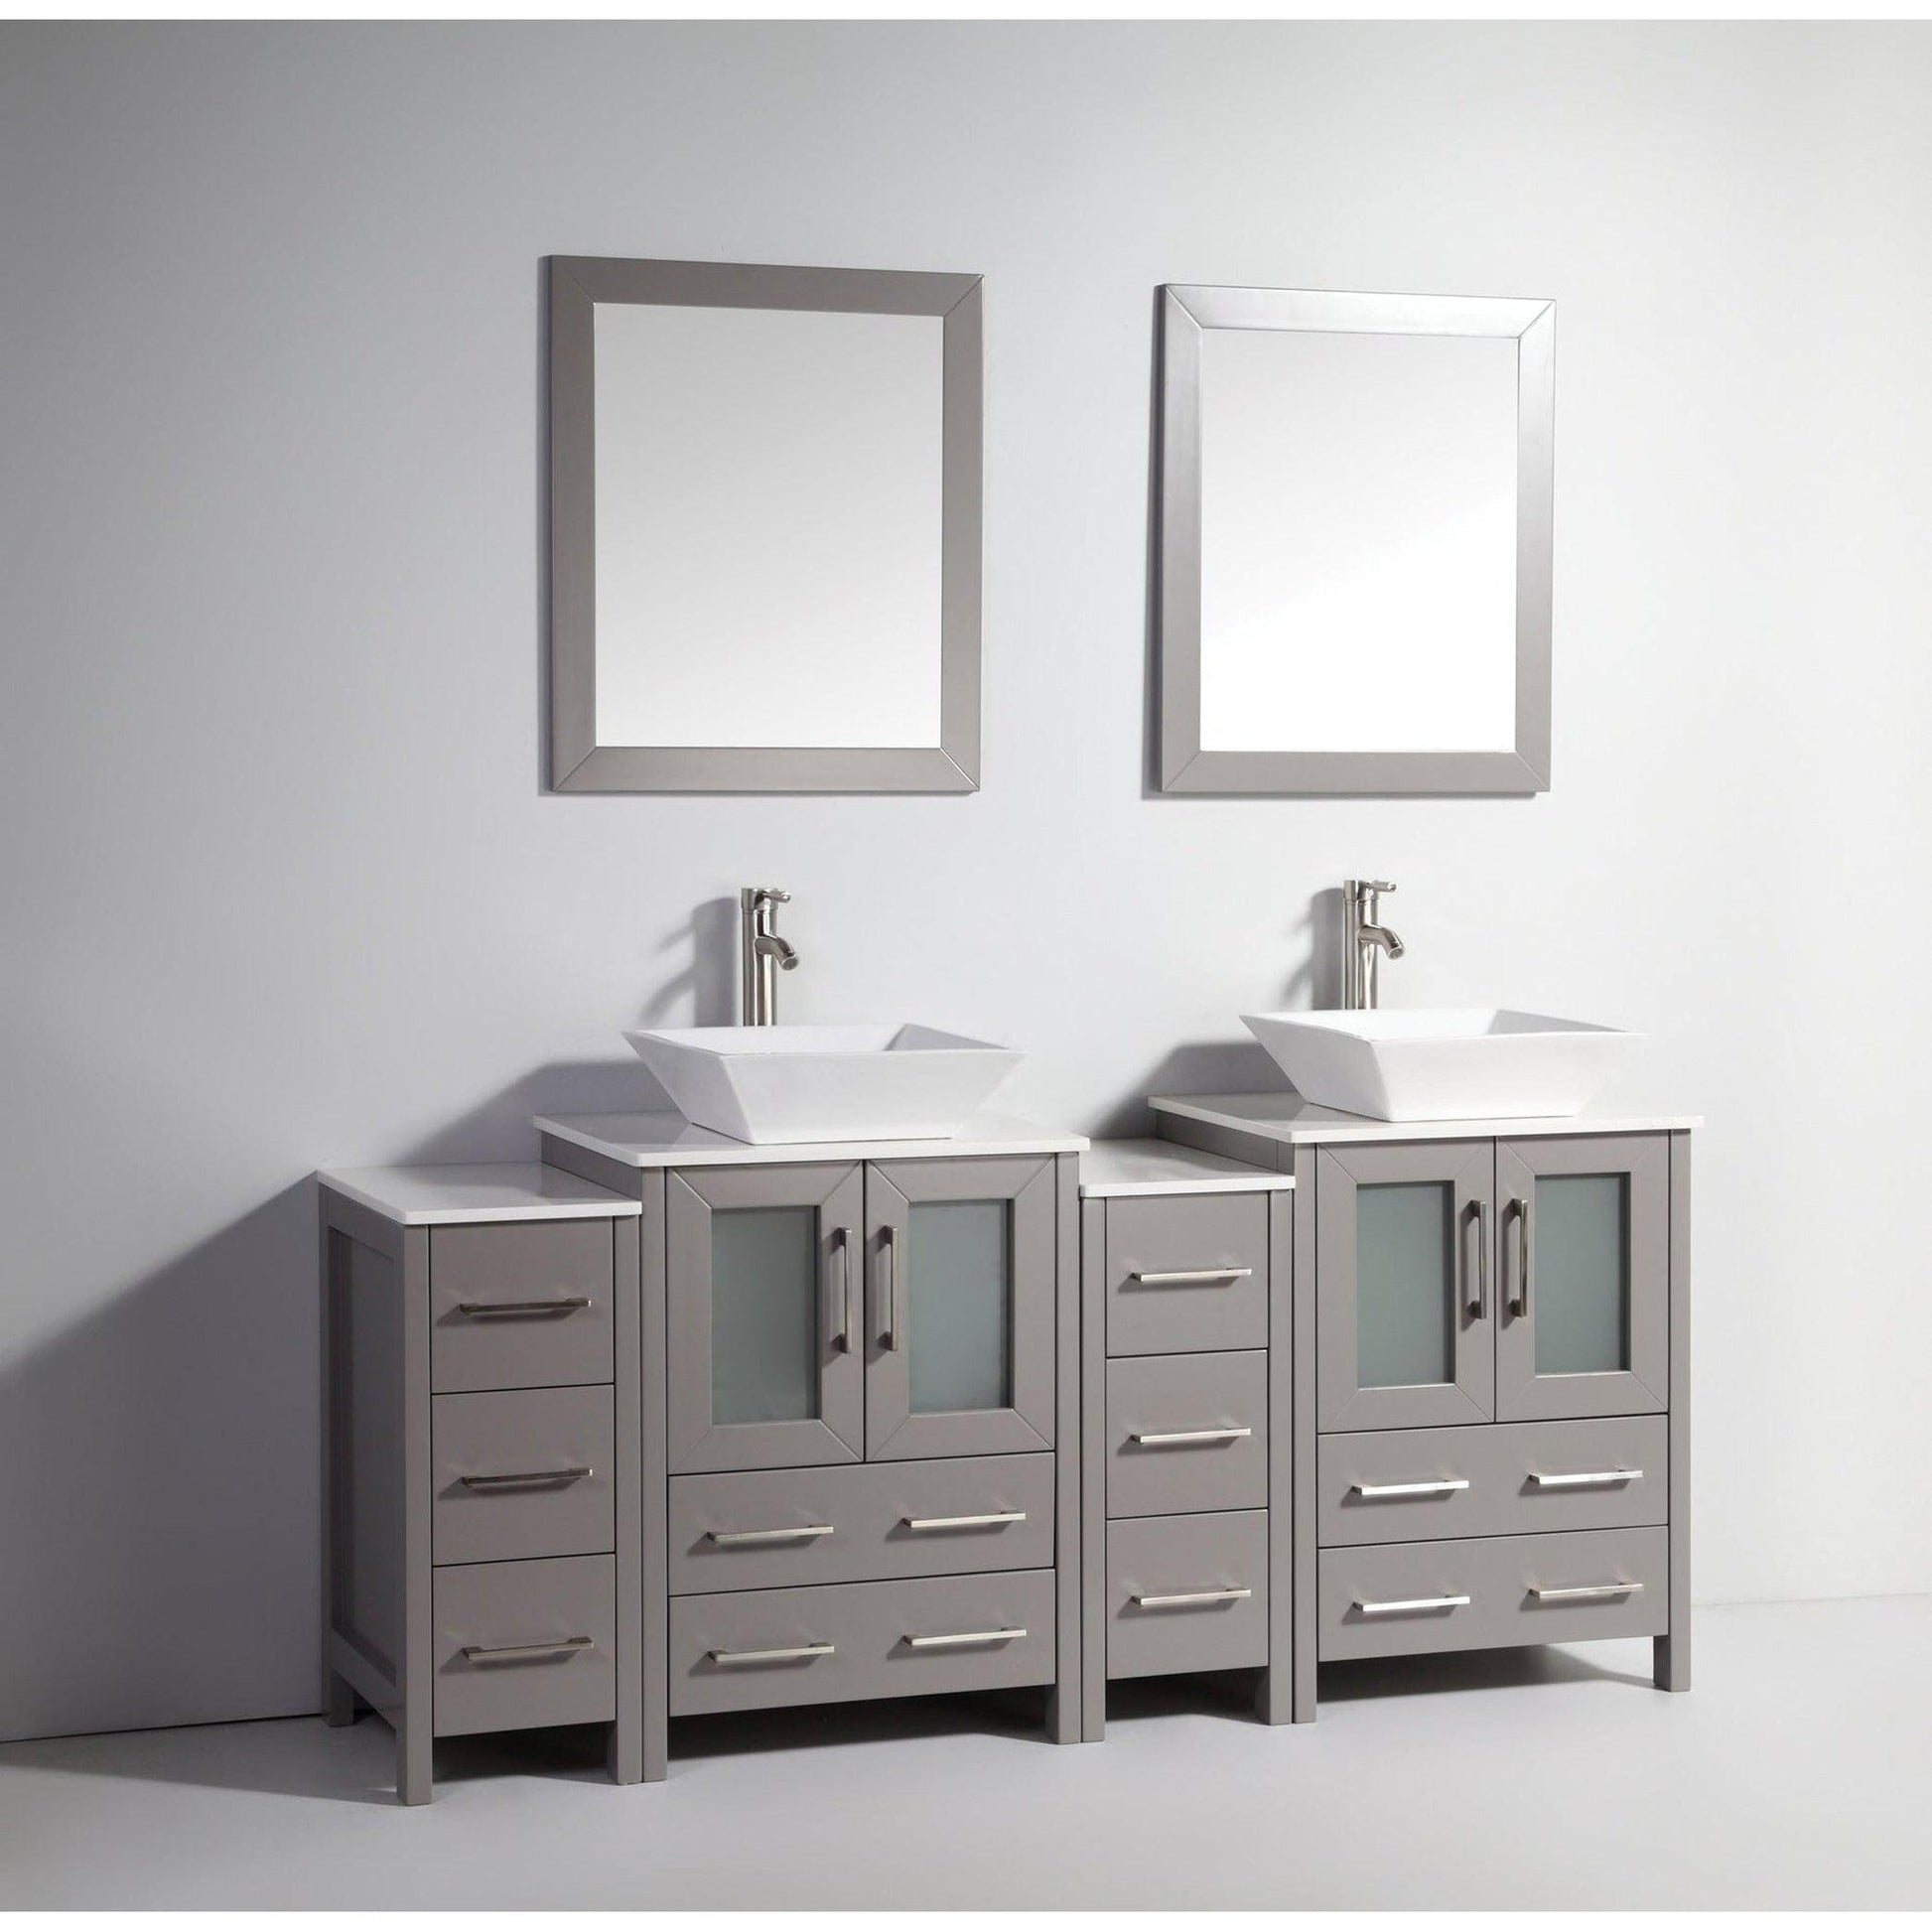 Vanity Art Ravenna 72" Double Gray Freestanding Vanity Set With White Engineered Marble Top, 2 Ceramic Vessel Sinks, 2 Side Cabinets and 2 Mirrors